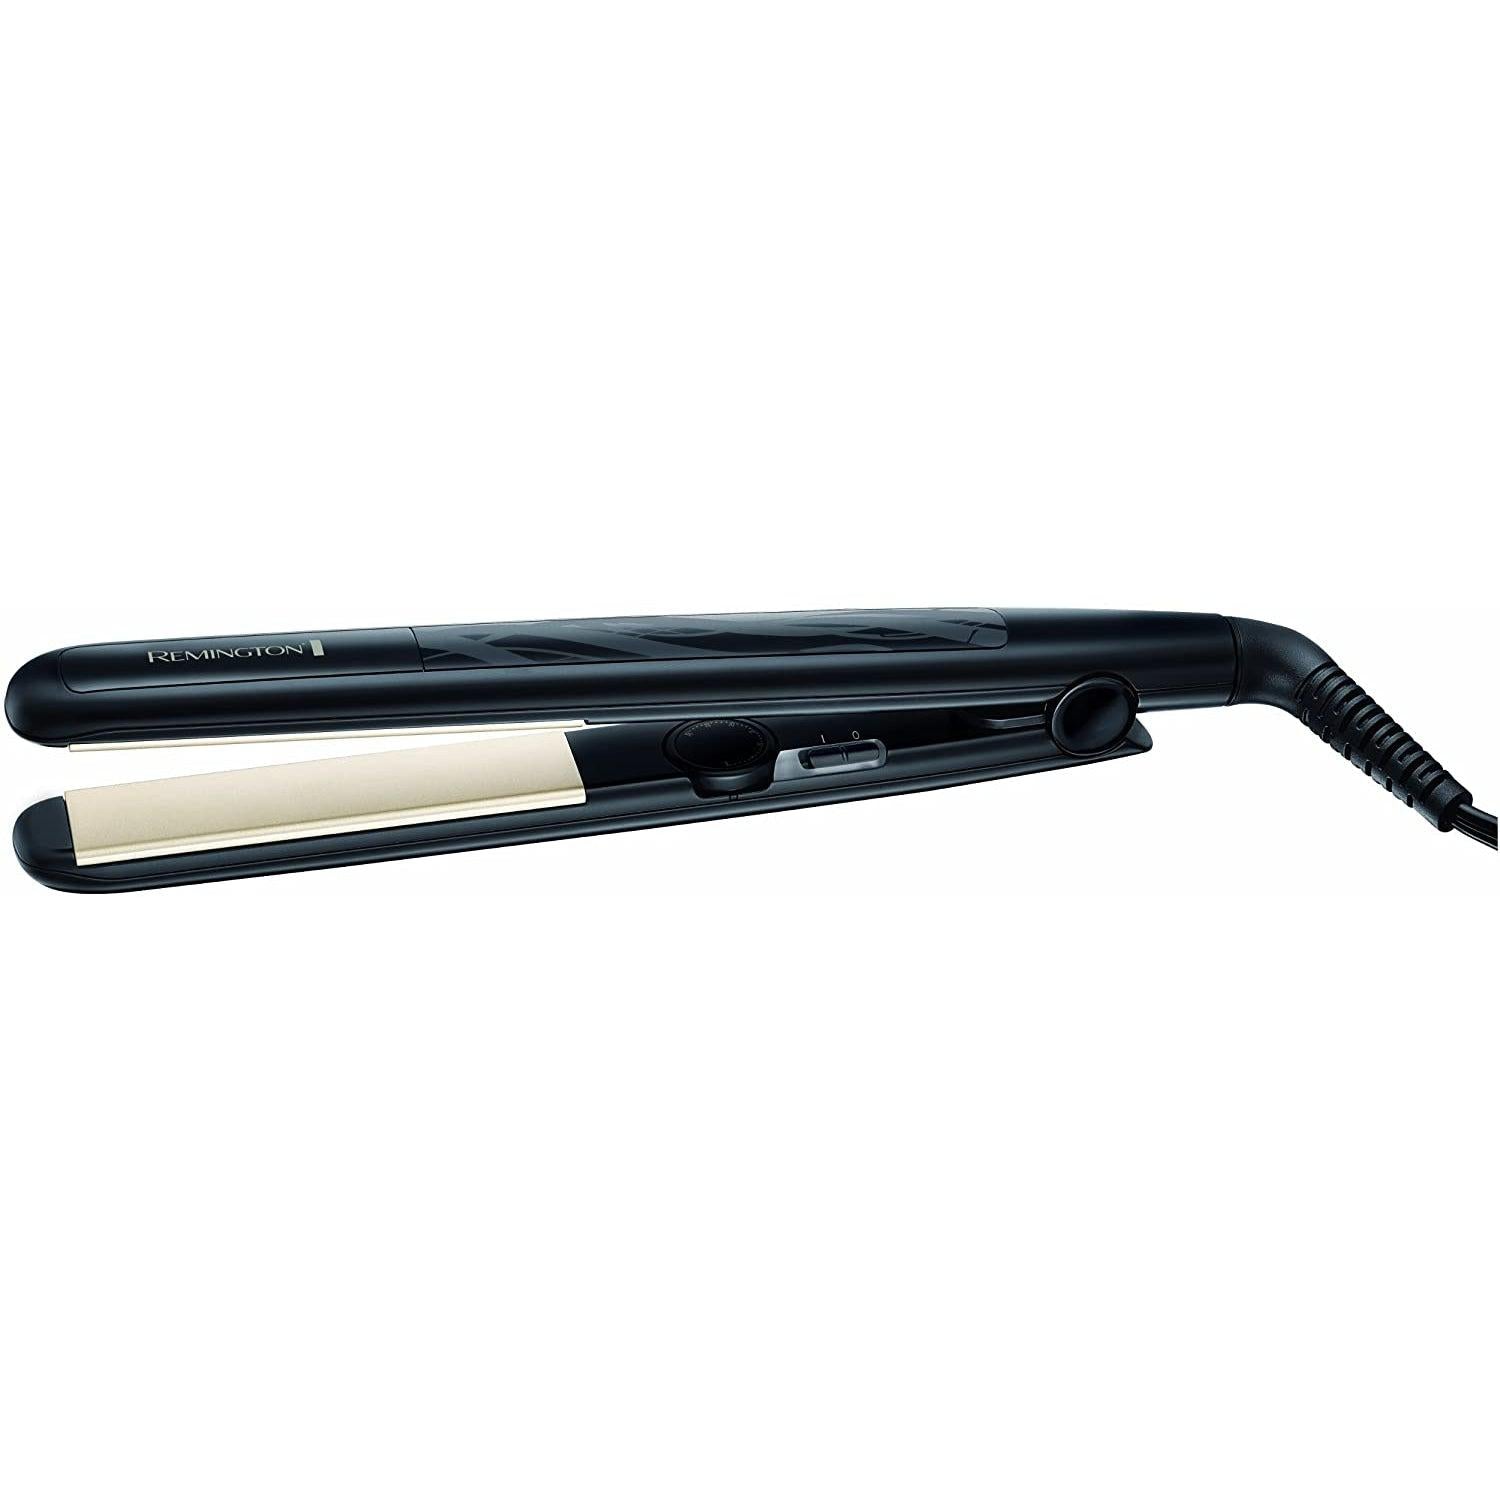 Remington Ceramic Straight 230 Hair Straighteners, 15 Seconds Heat Up Time with Variable Temperature Setting - S3500 - Healthxpress.ie